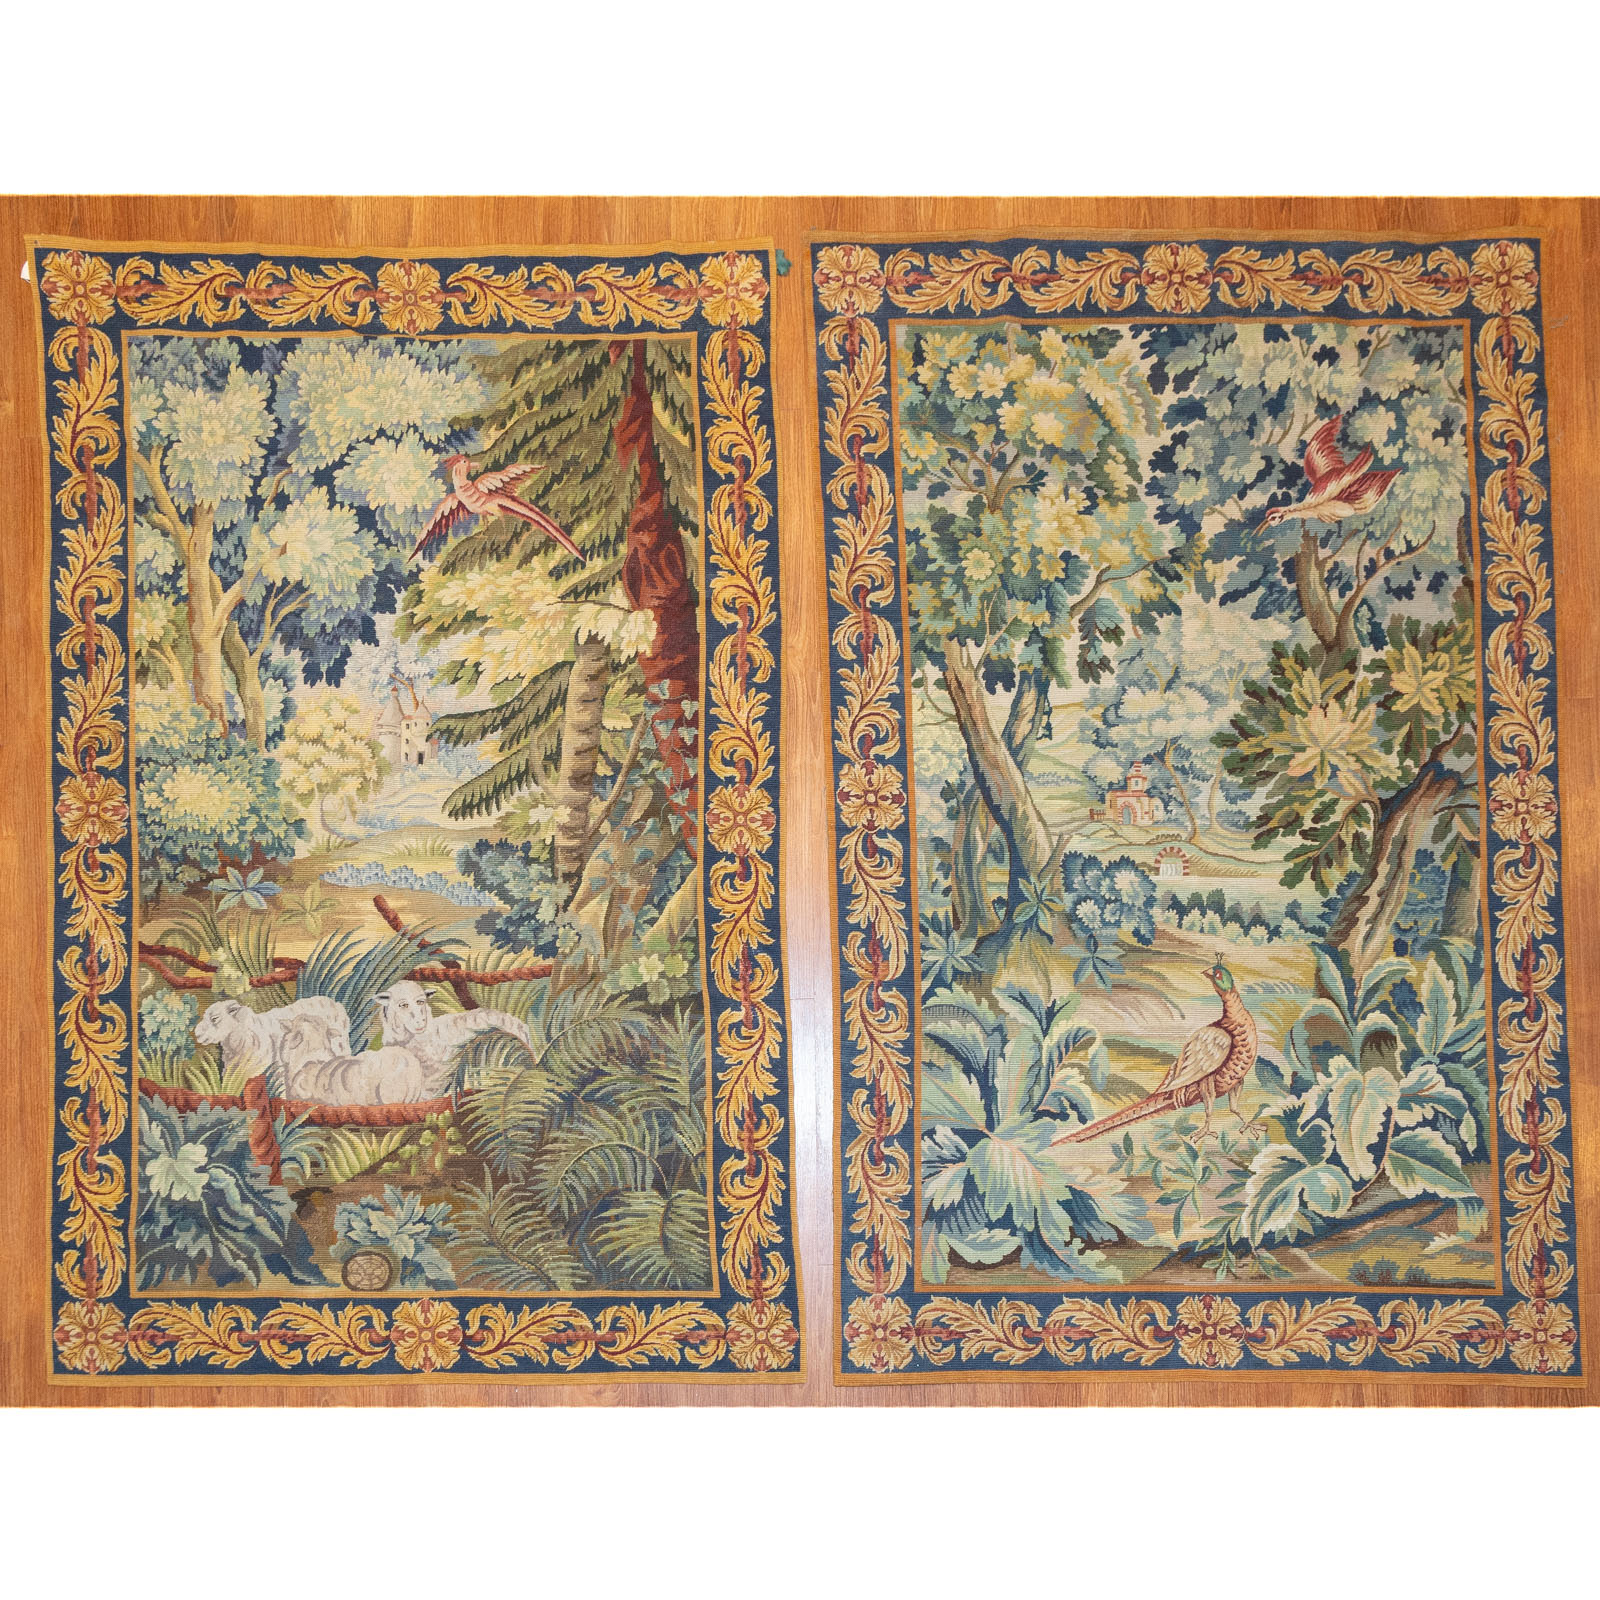 A PAIR OF FLEMISH STYLE TAPESTRIES  2ea0e1